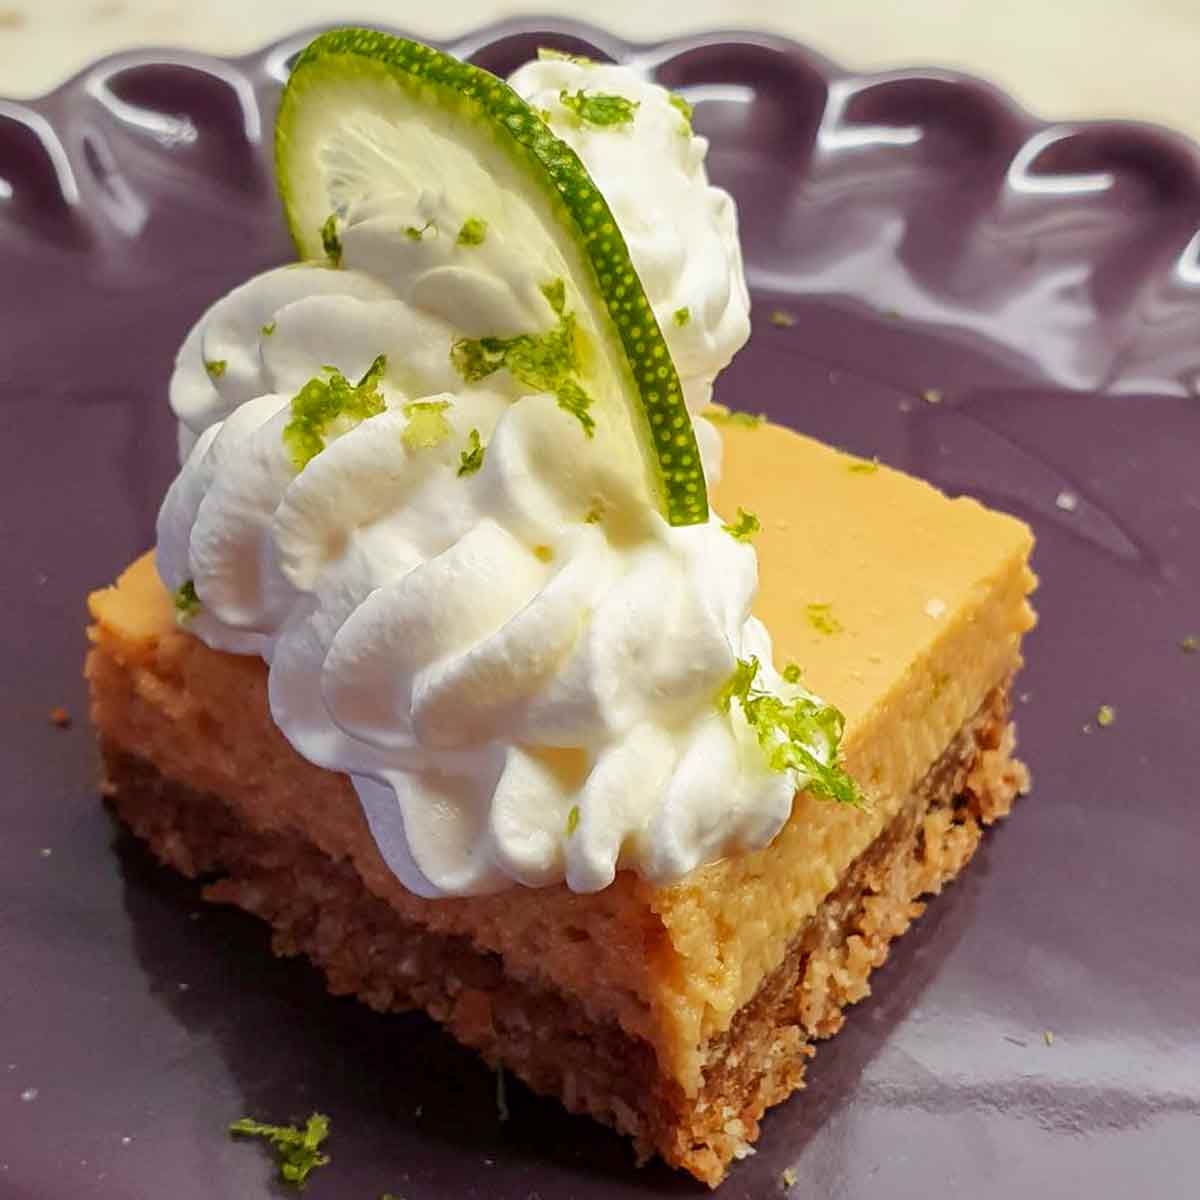 A square key lime pie bar with whipped cream and a lime slice on top on a purple plate.